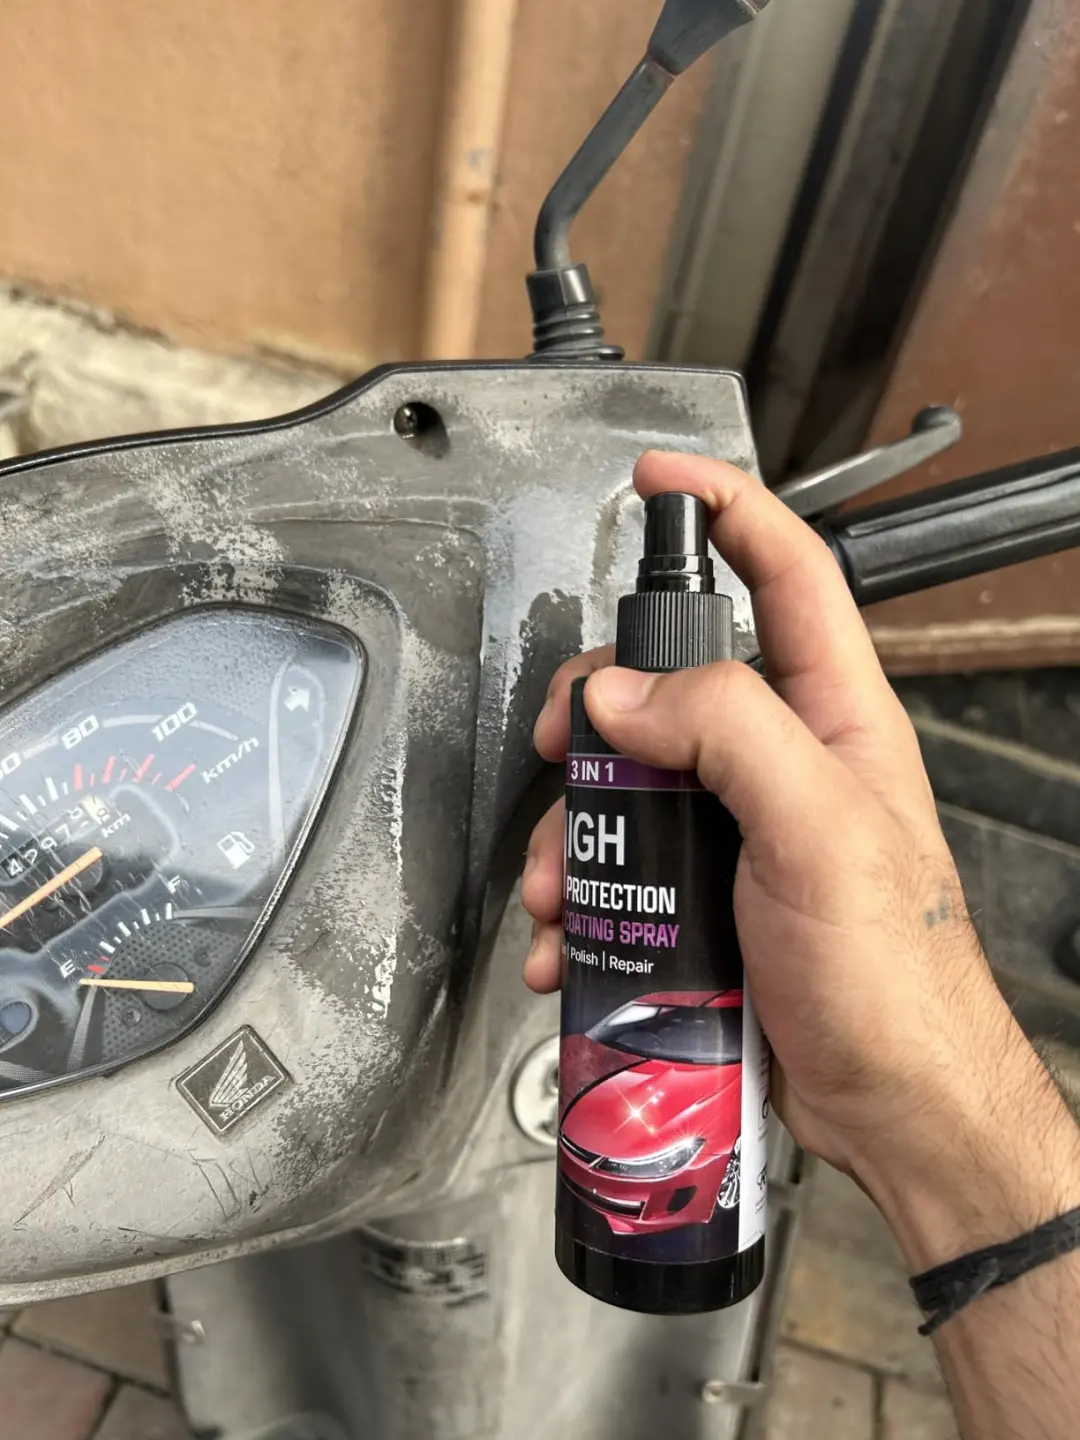 3 in 1 High Protection Quick Car Ceramic Coating Spray – Lifestyle